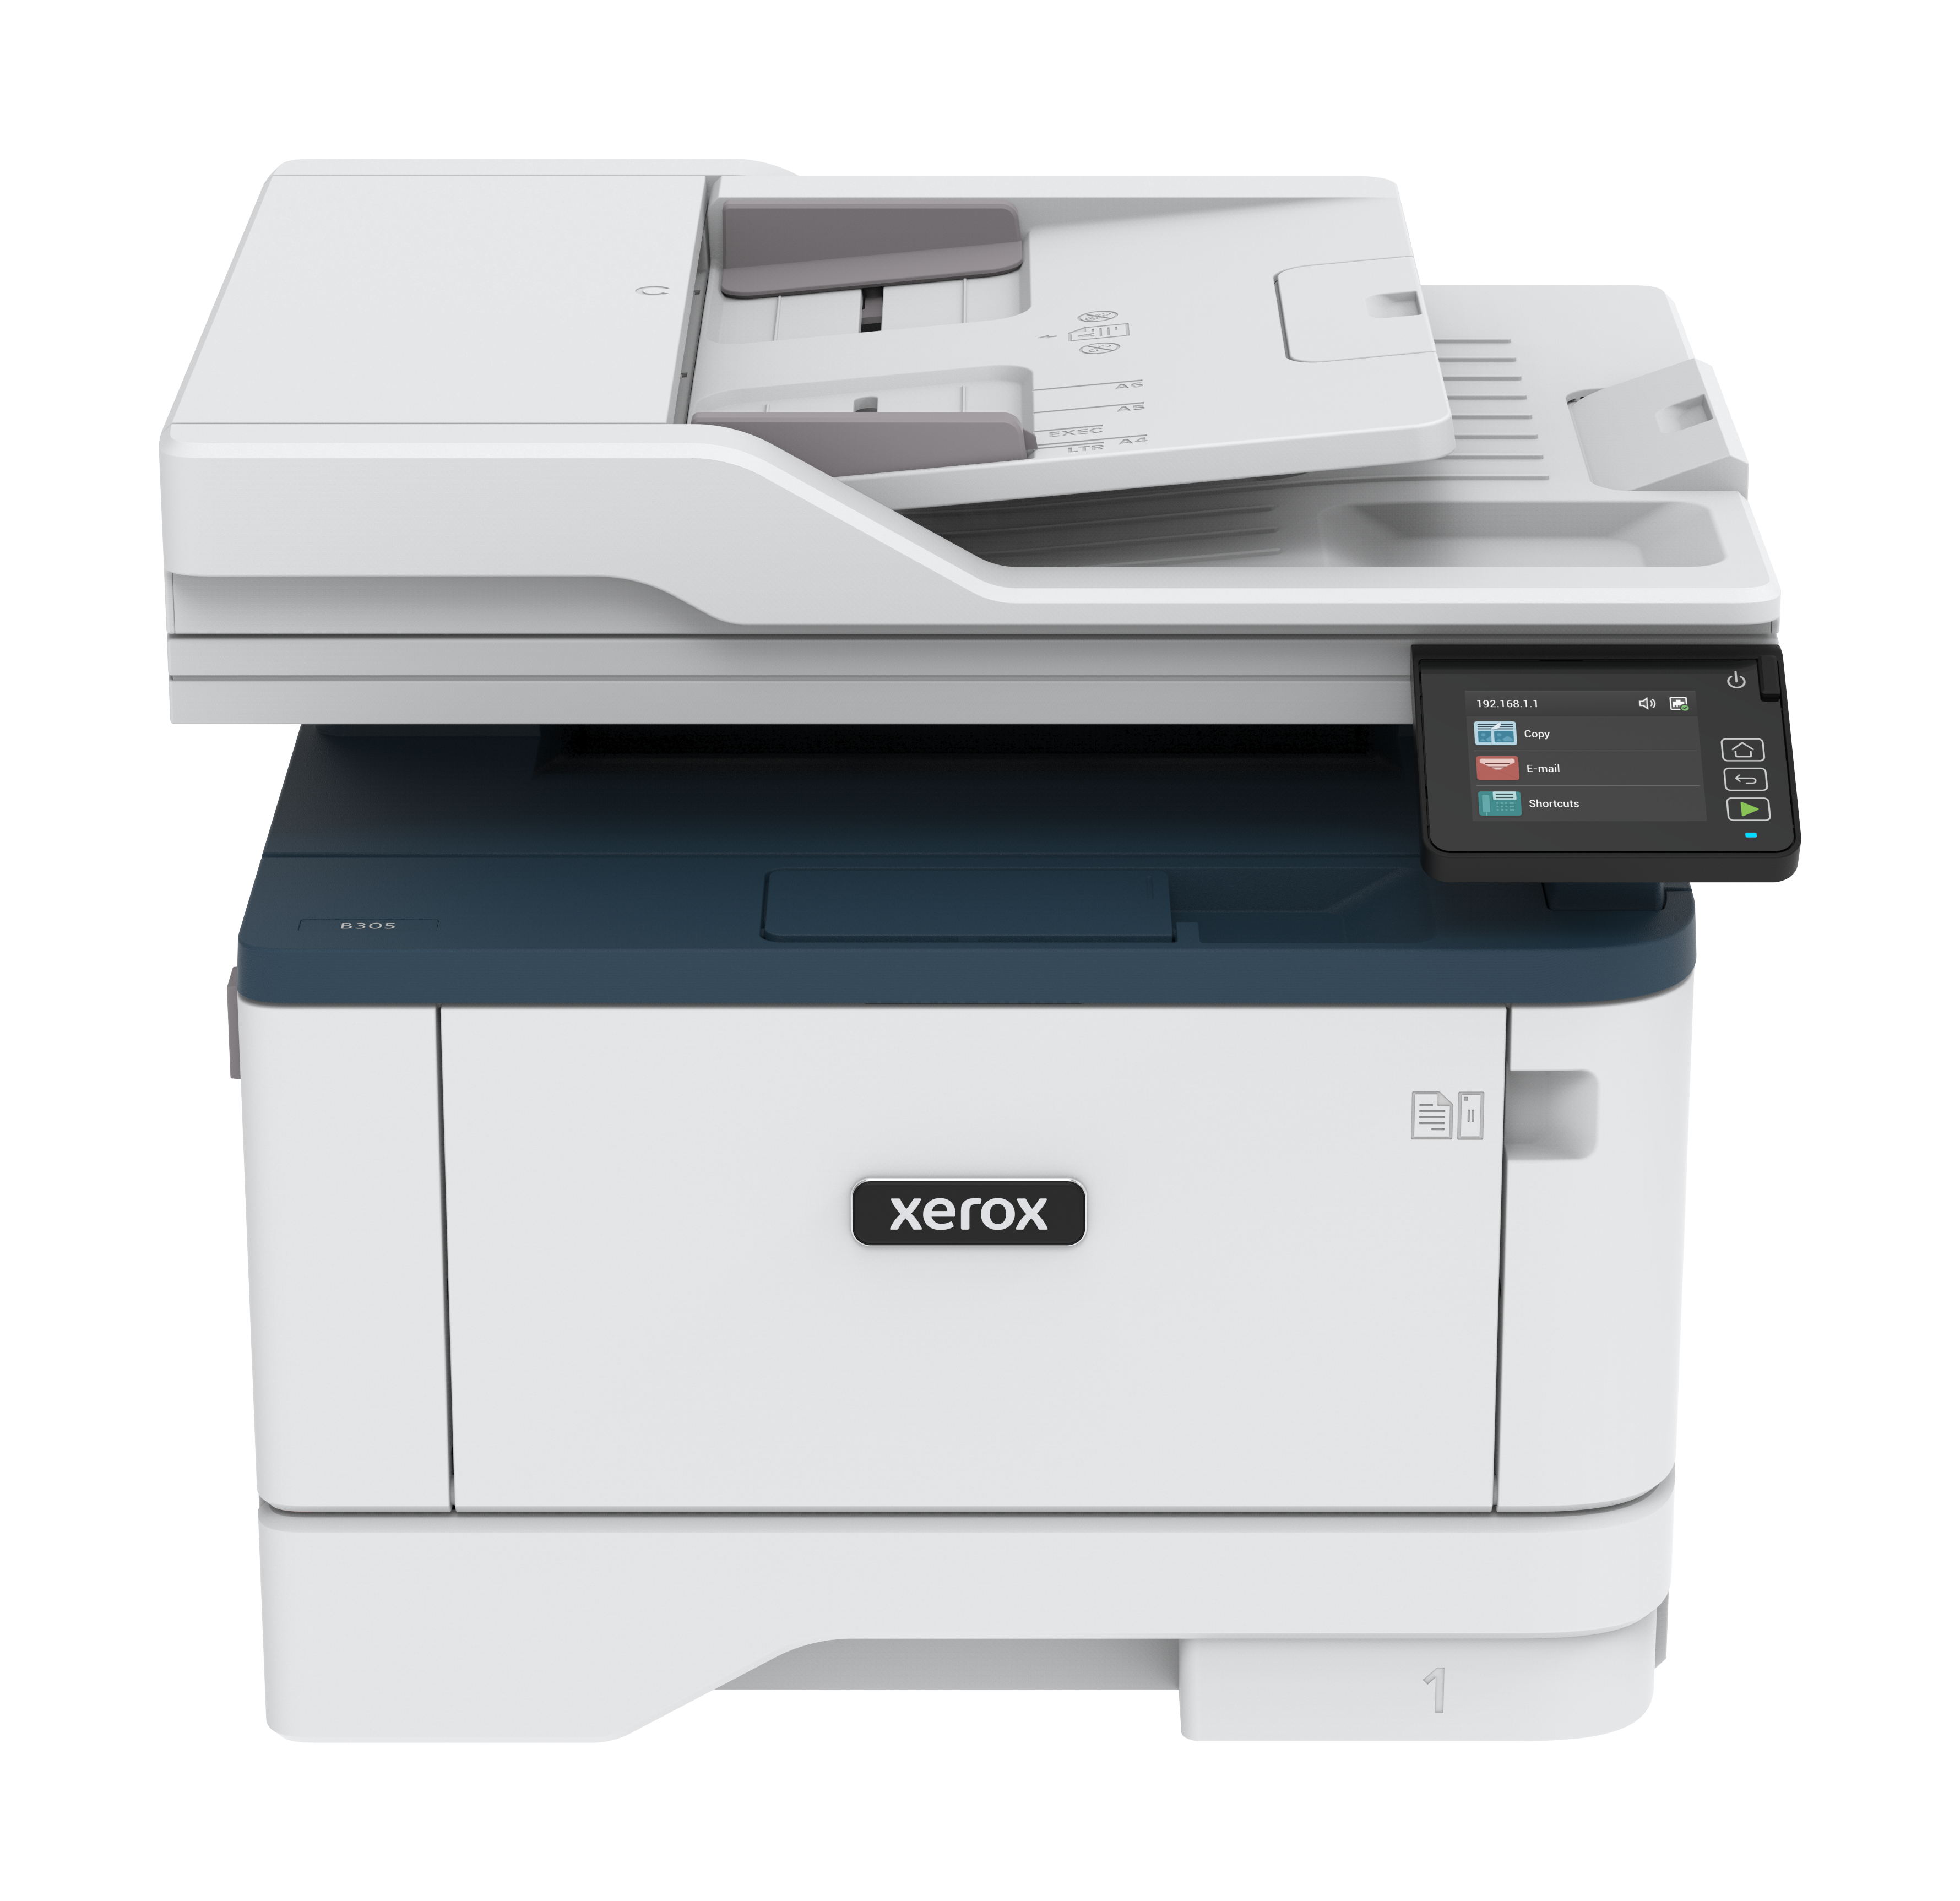 Xerox B305 Multifunction Printer, Print/Copy/Scan, Up To 40 ppm,  Letter/Legal, USB/Ethernet And Wireless, 110V B305/DNI - Xerox